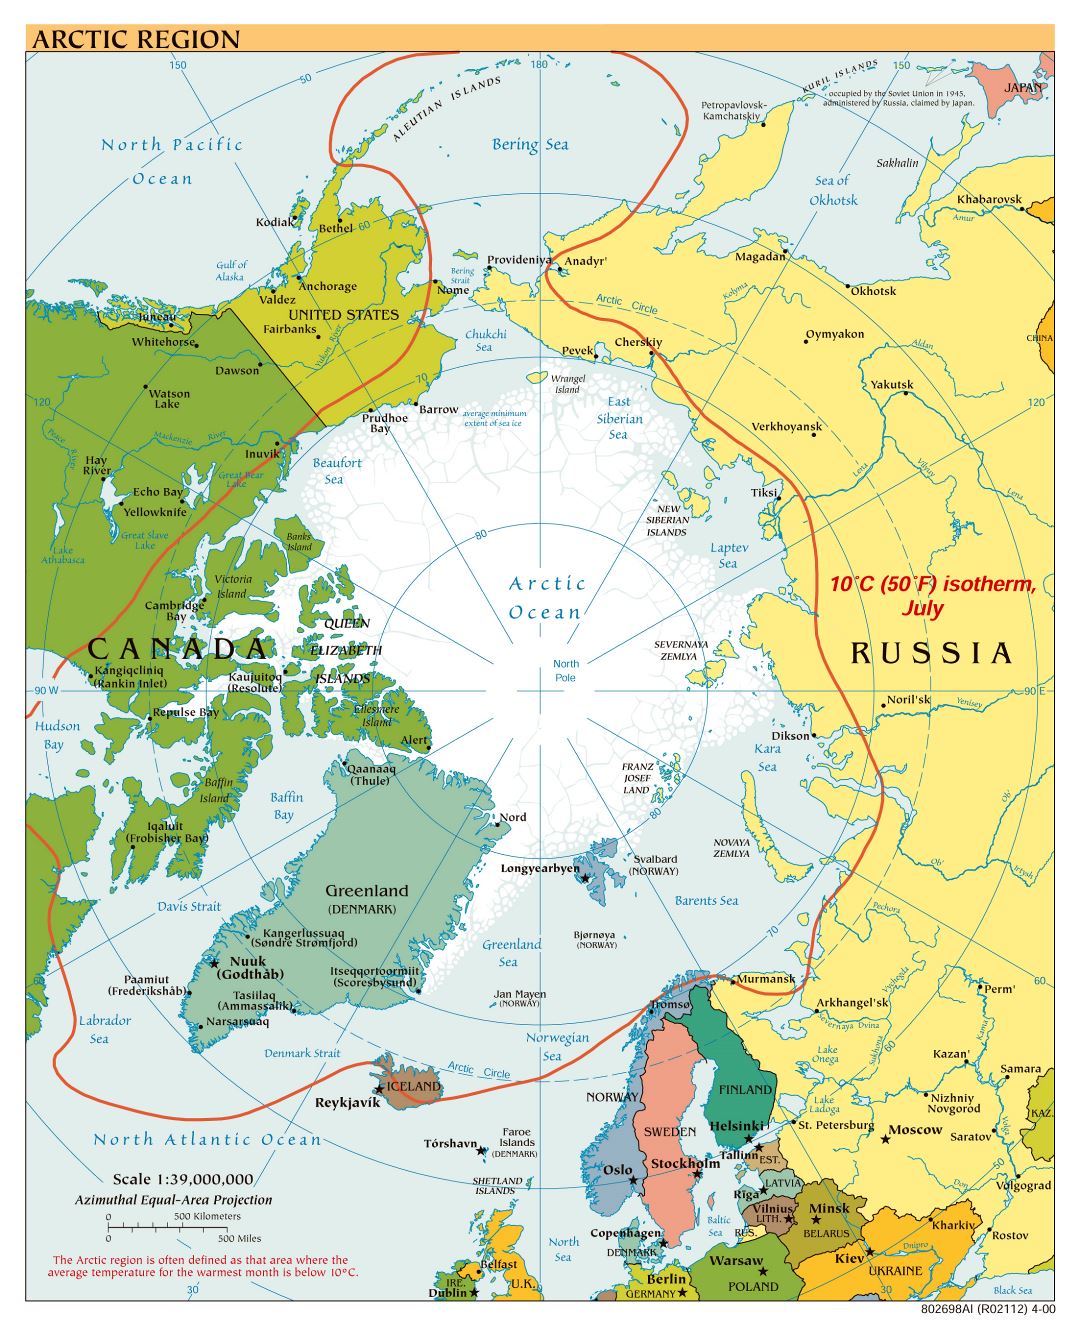 Large scale political map of Arctic Region - 2000